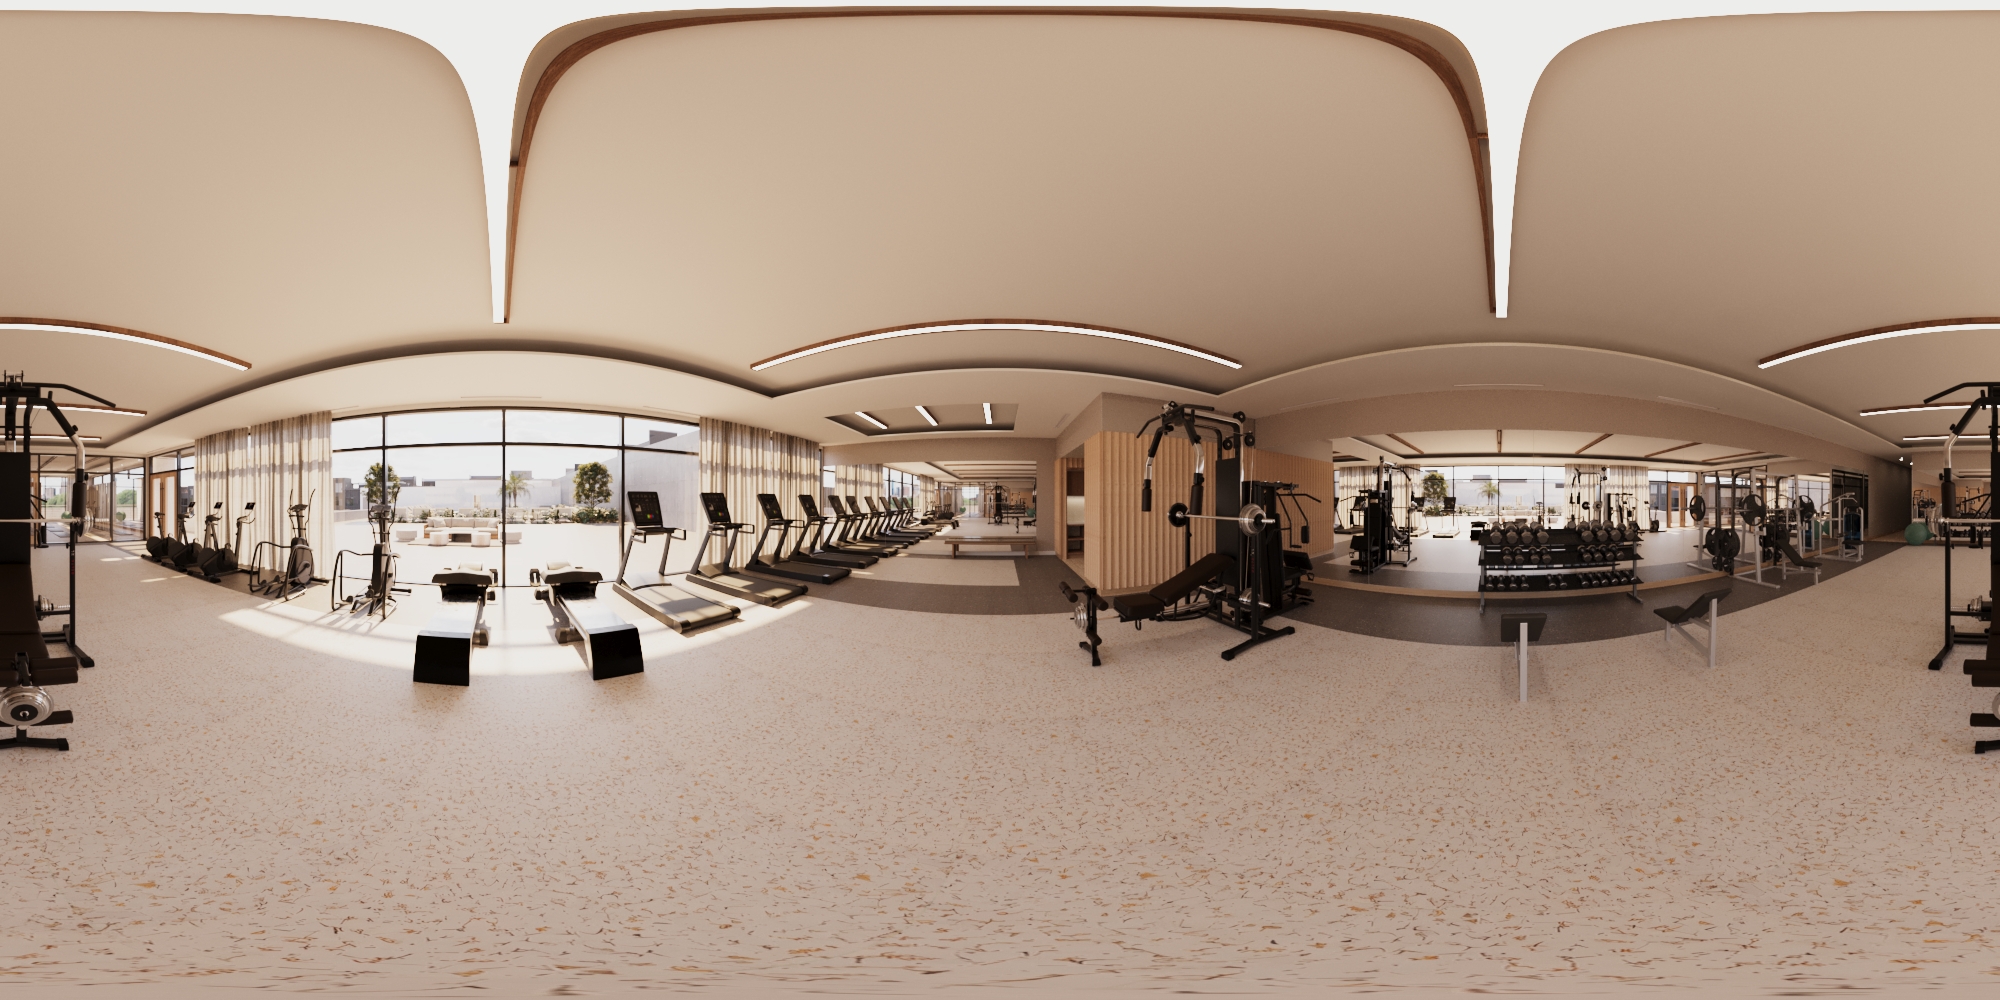 Panoramic views of a gym in an apartment building.